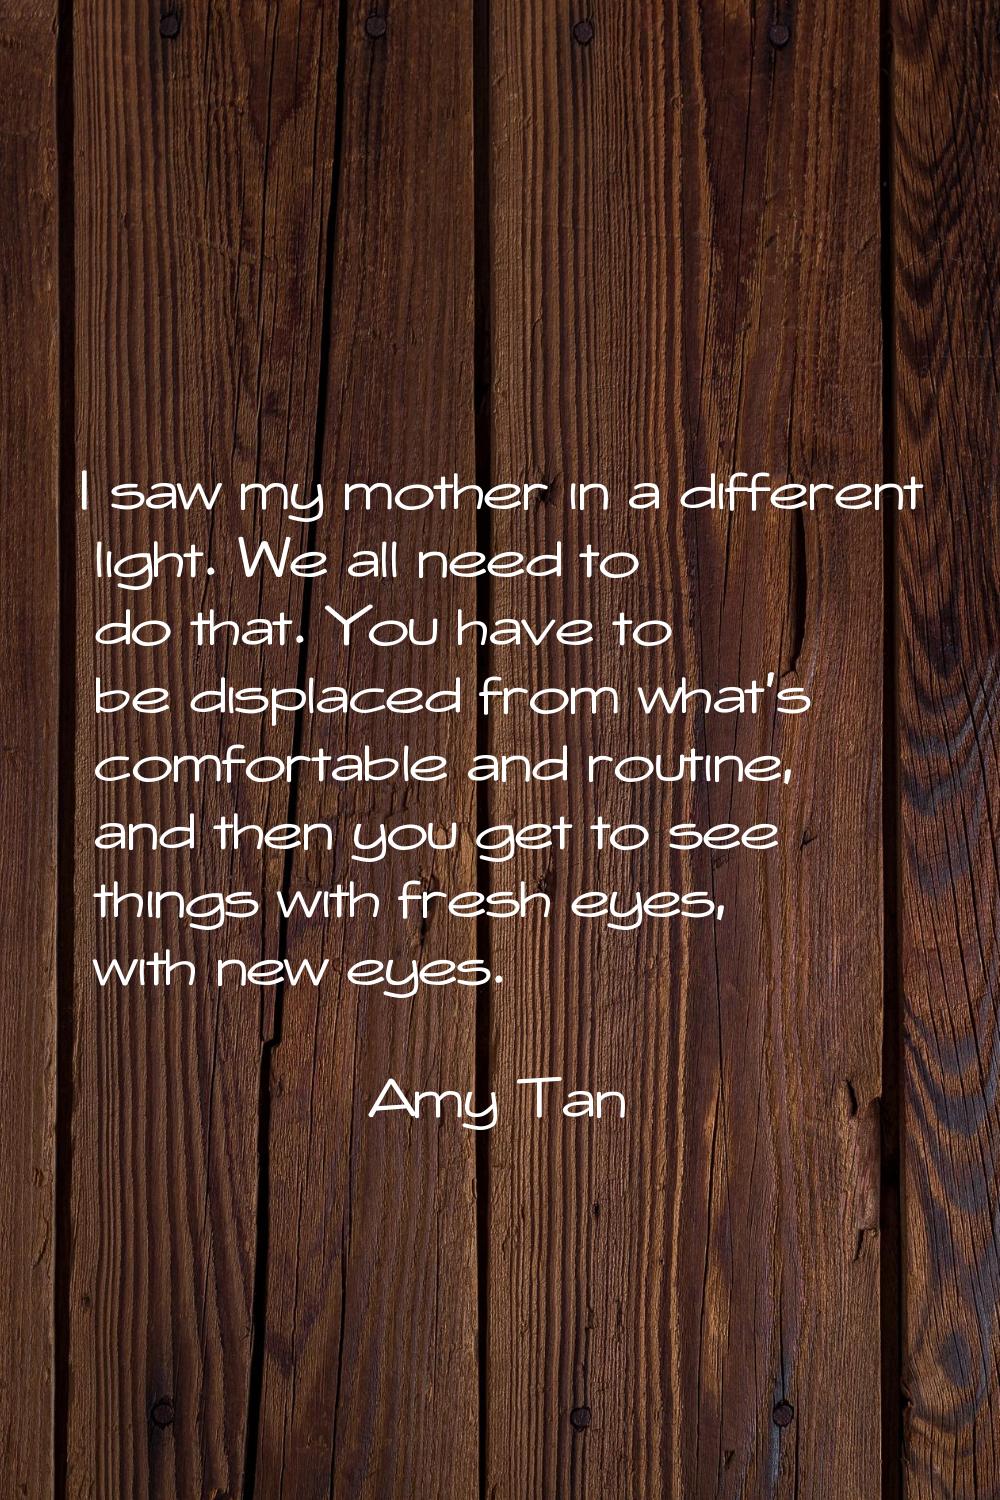 I saw my mother in a different light. We all need to do that. You have to be displaced from what's 